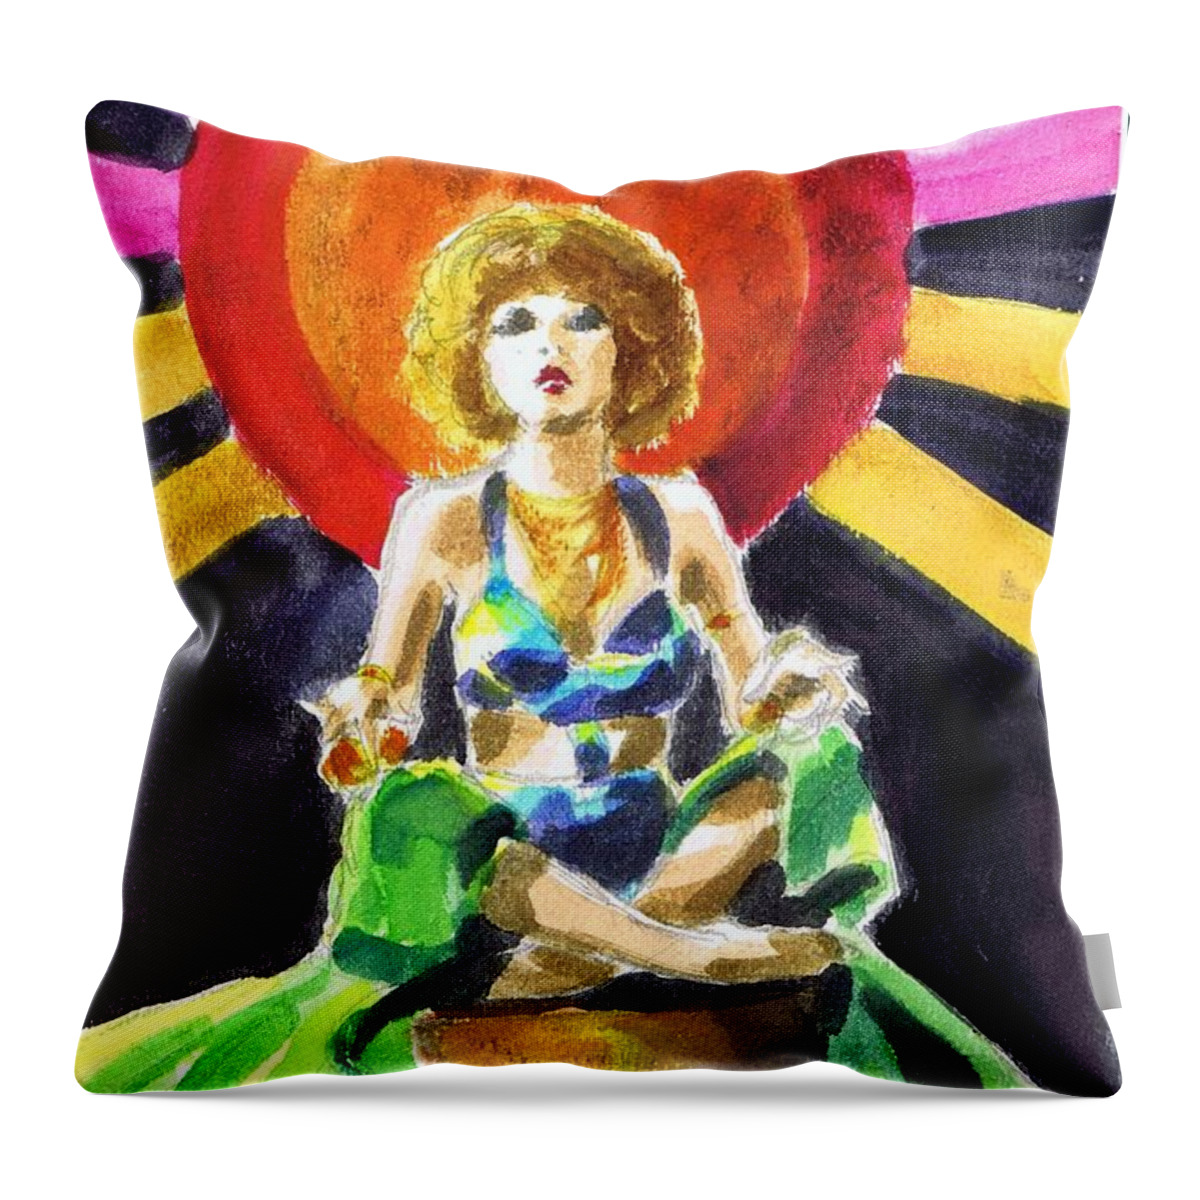 Nostalgia Throw Pillow featuring the drawing Mystic Vamp by Mel Thompson